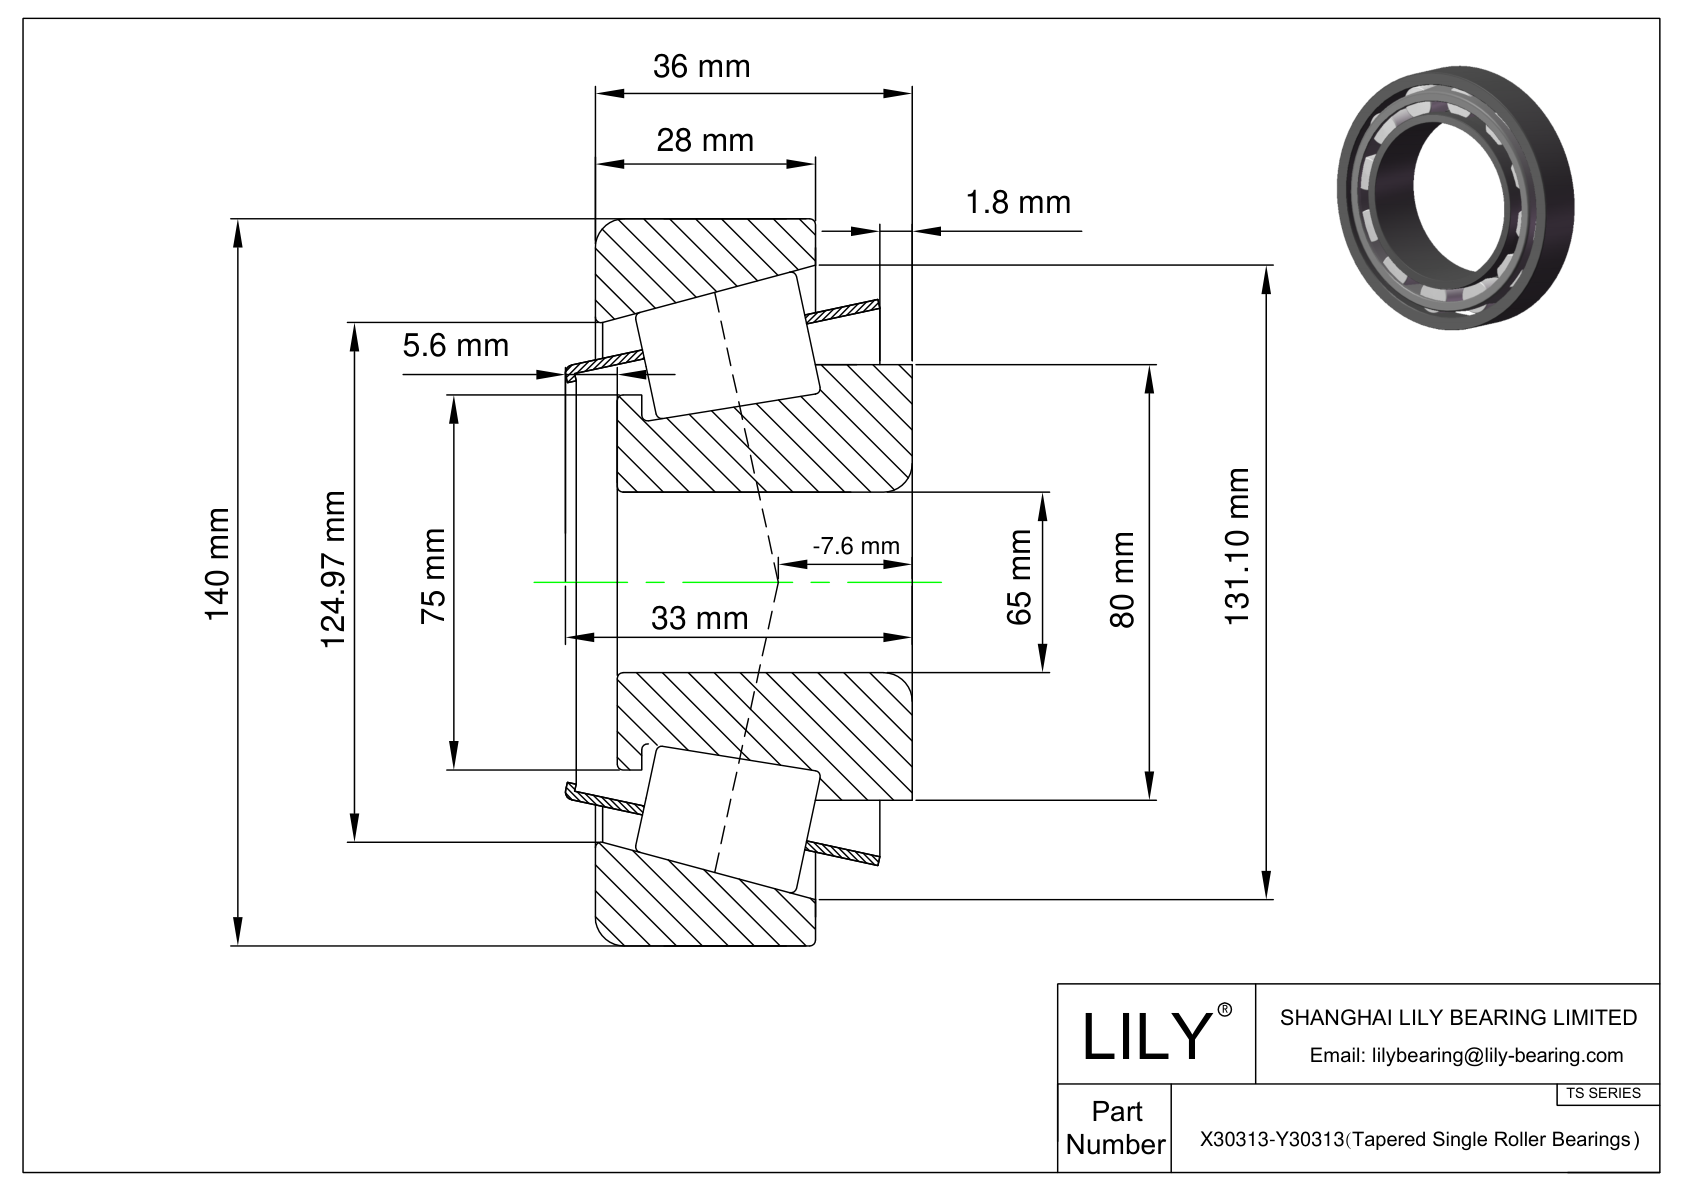 X30313-Y30313 TS (Tapered Single Roller Bearings) (Metric) cad drawing